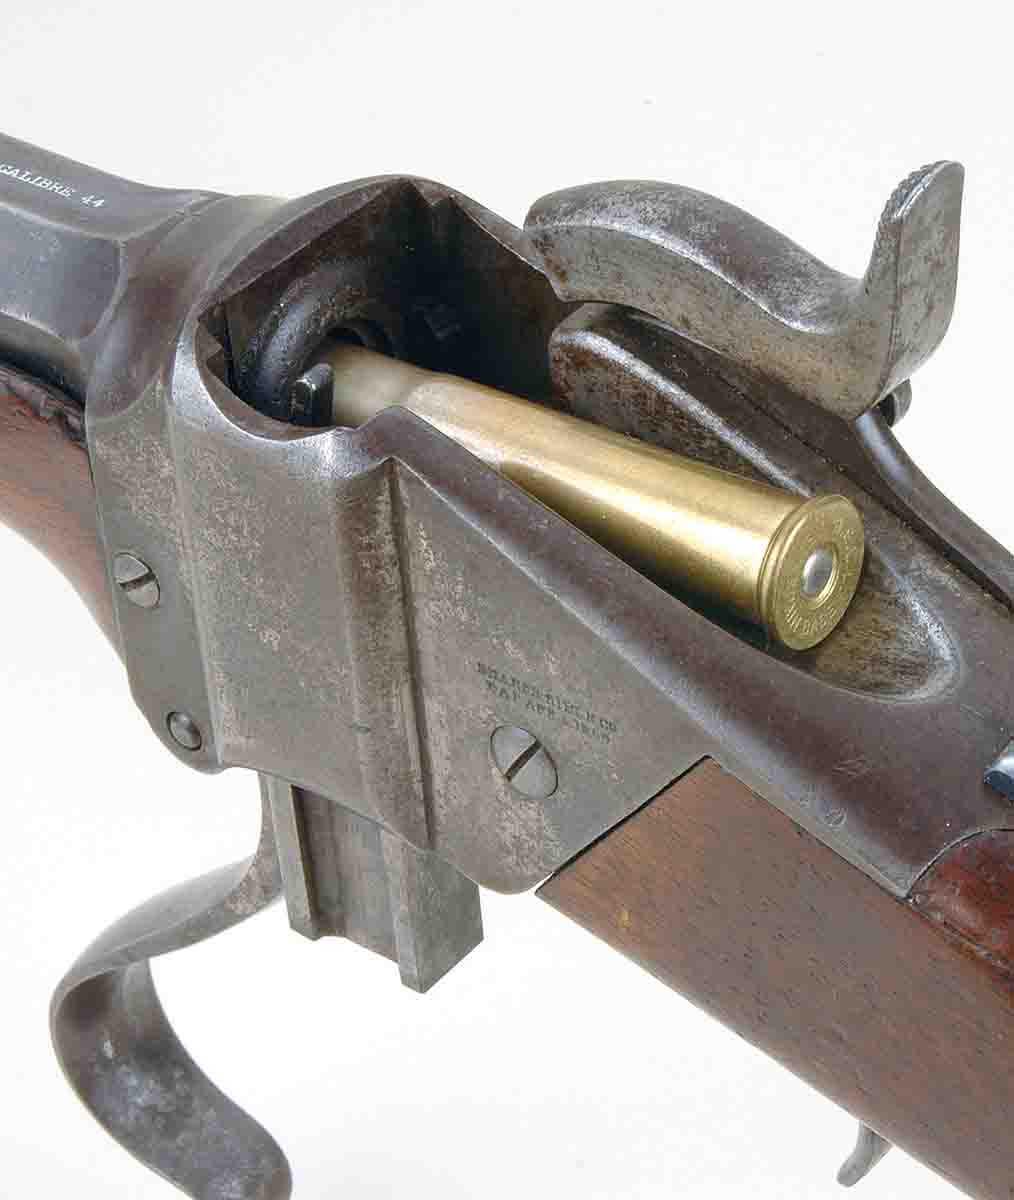 The Sharps falling-block design was popular with shooters/hunters who wanted to use the longest cartridges, because there was no limit to the case length it could use.